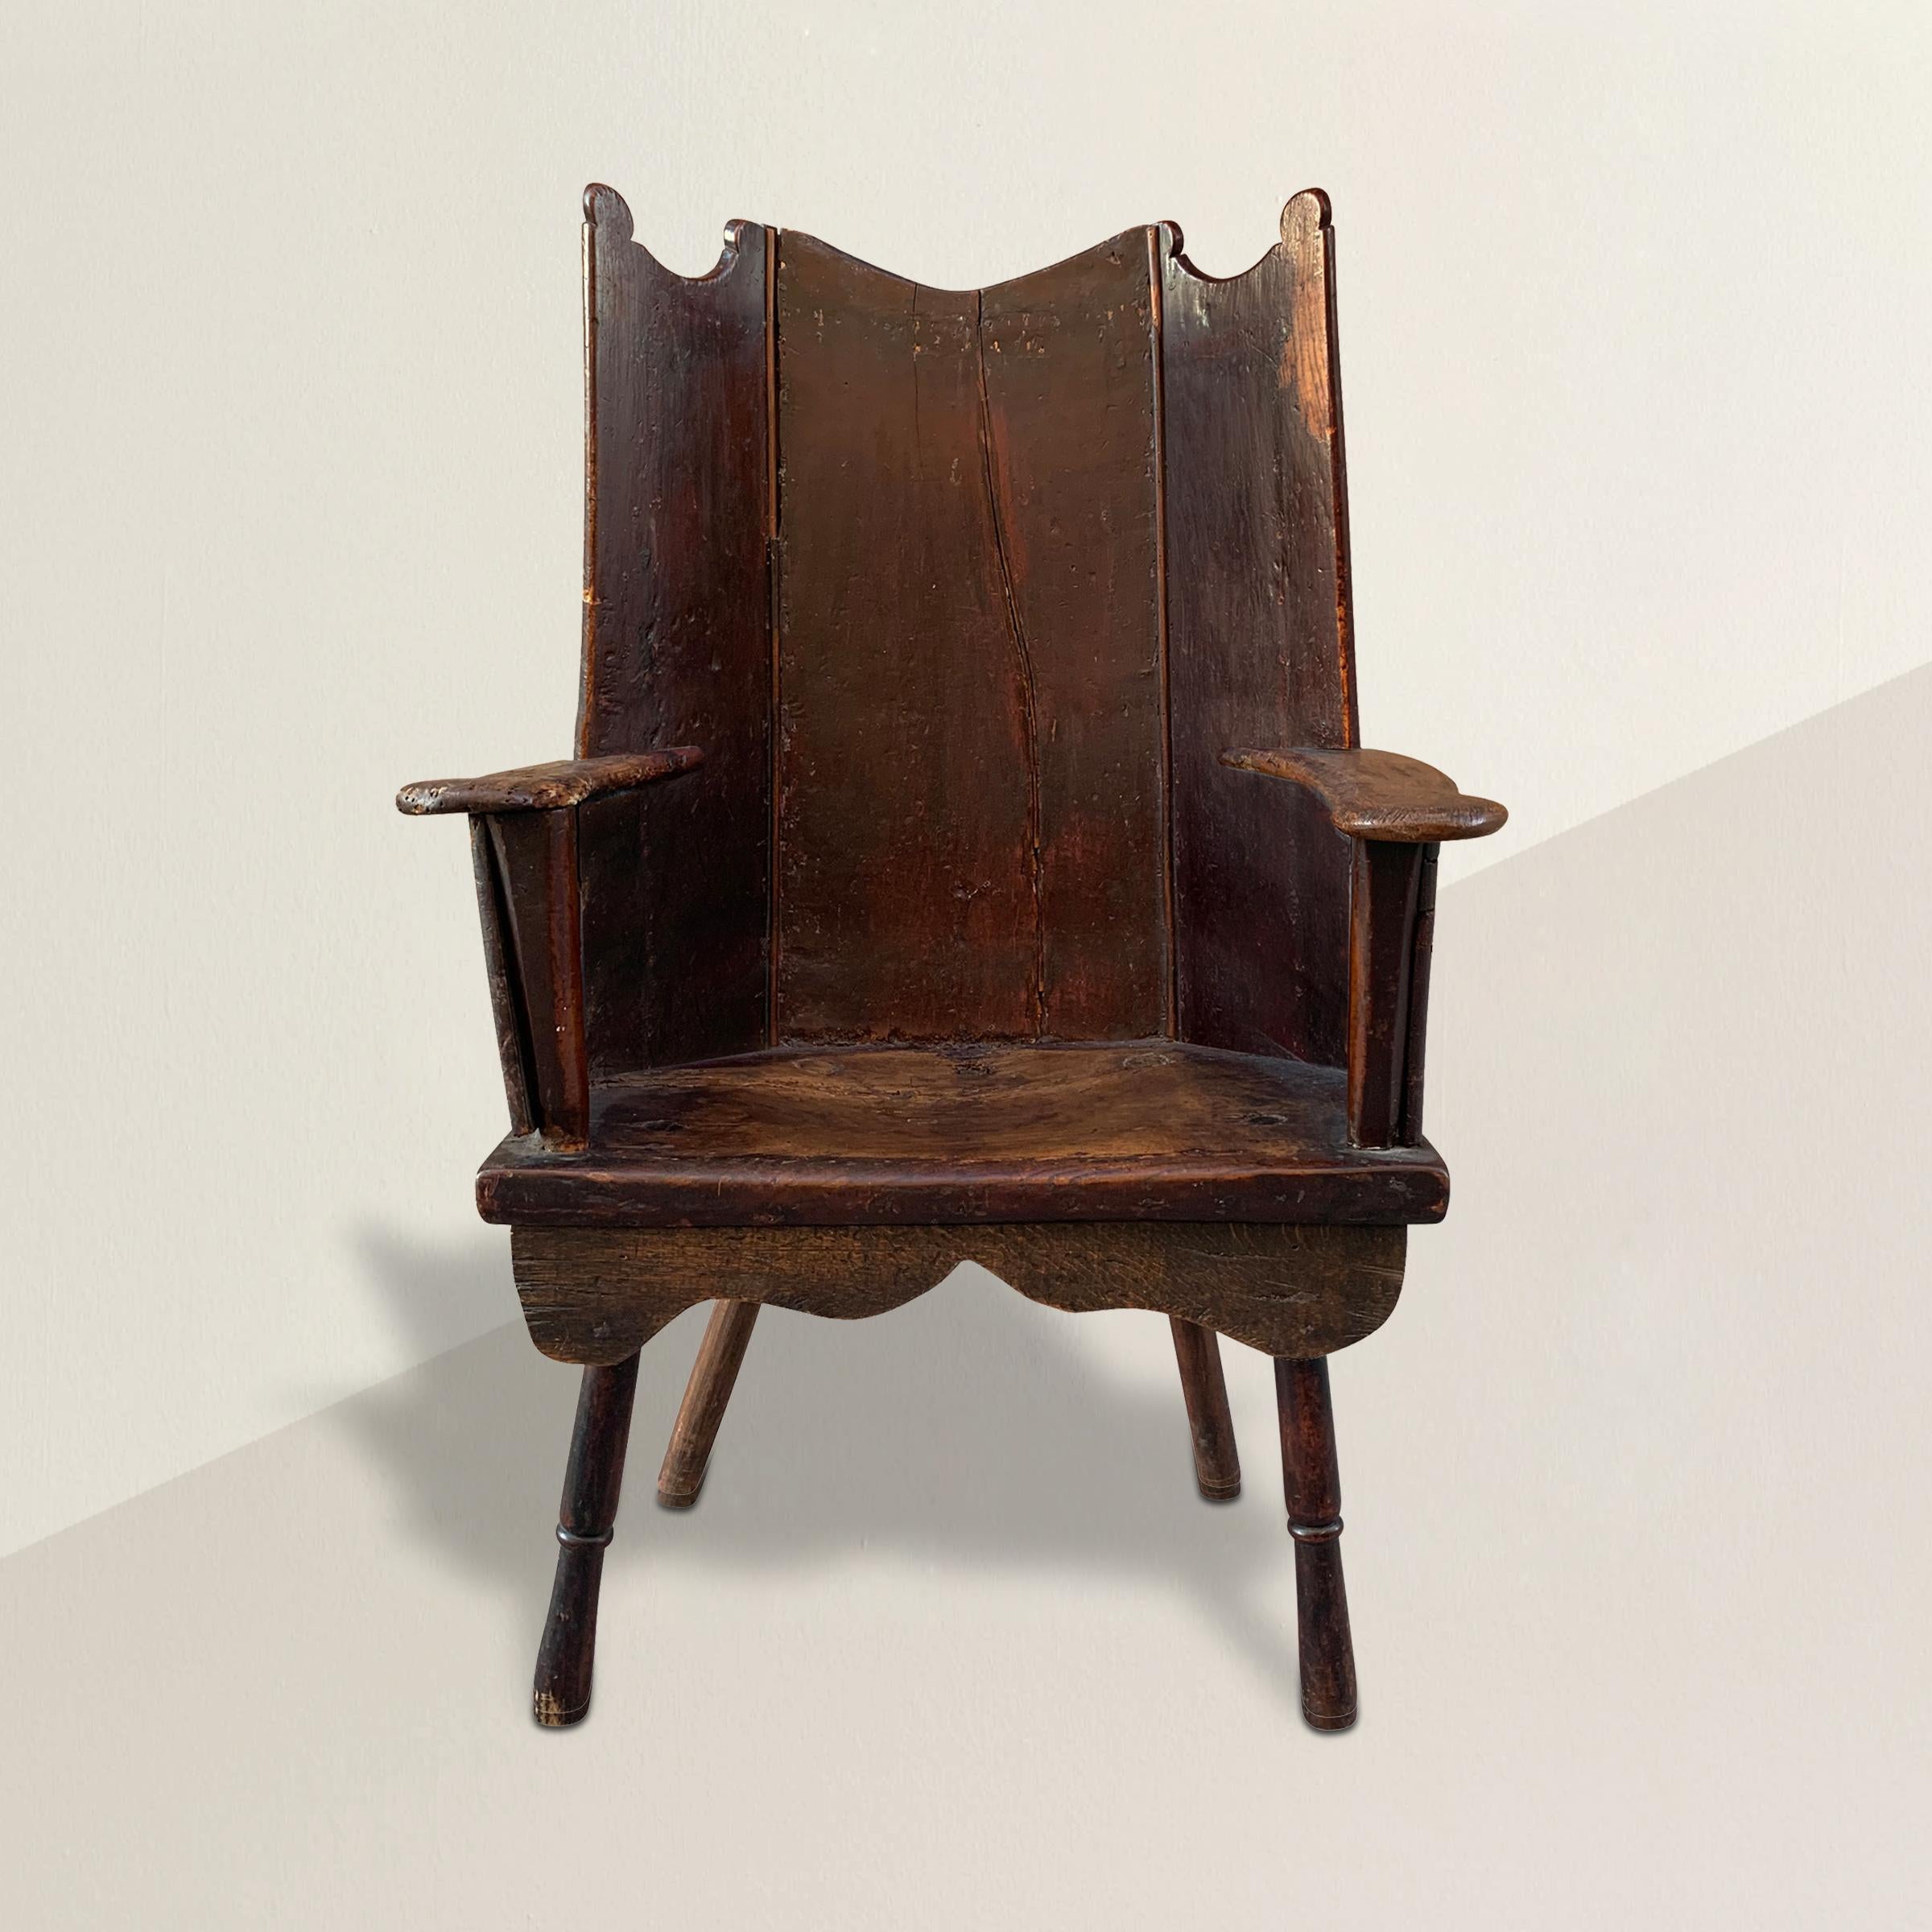 An extraordinary 18th century Welsh oak wingback lambing chair having a back constructed of three oak panels with scalloped top, and straight flat arms with rounded ends, through turned front legs and more recent back legs. Lambing chairs were